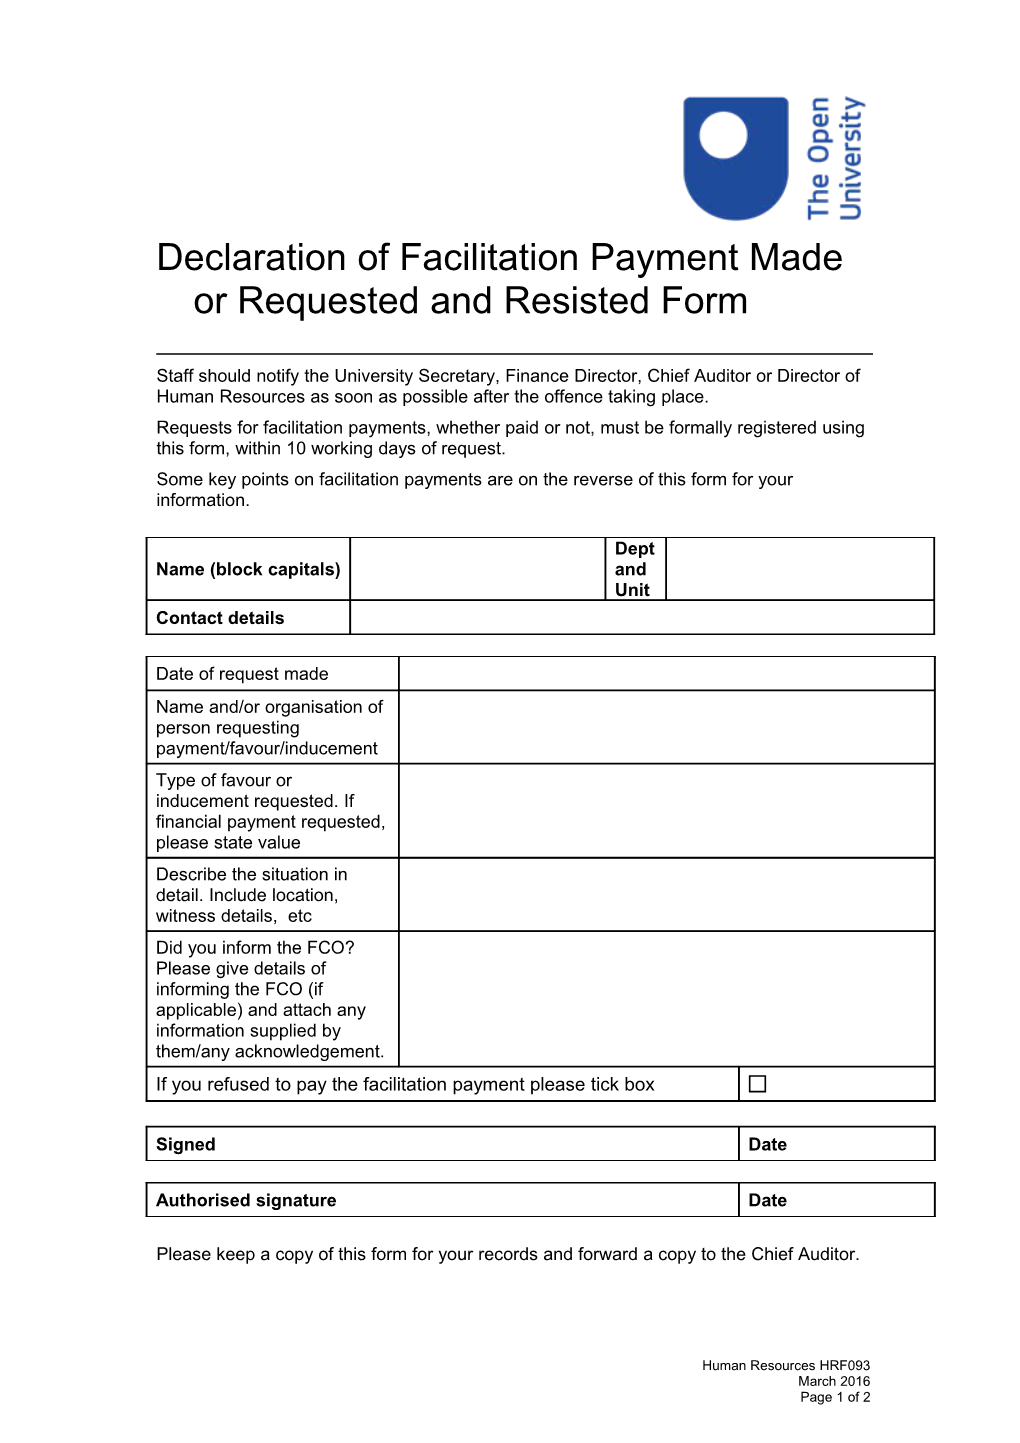 Declaration of Facilitation Payment Made Or Requested and Resisted Form HRF093